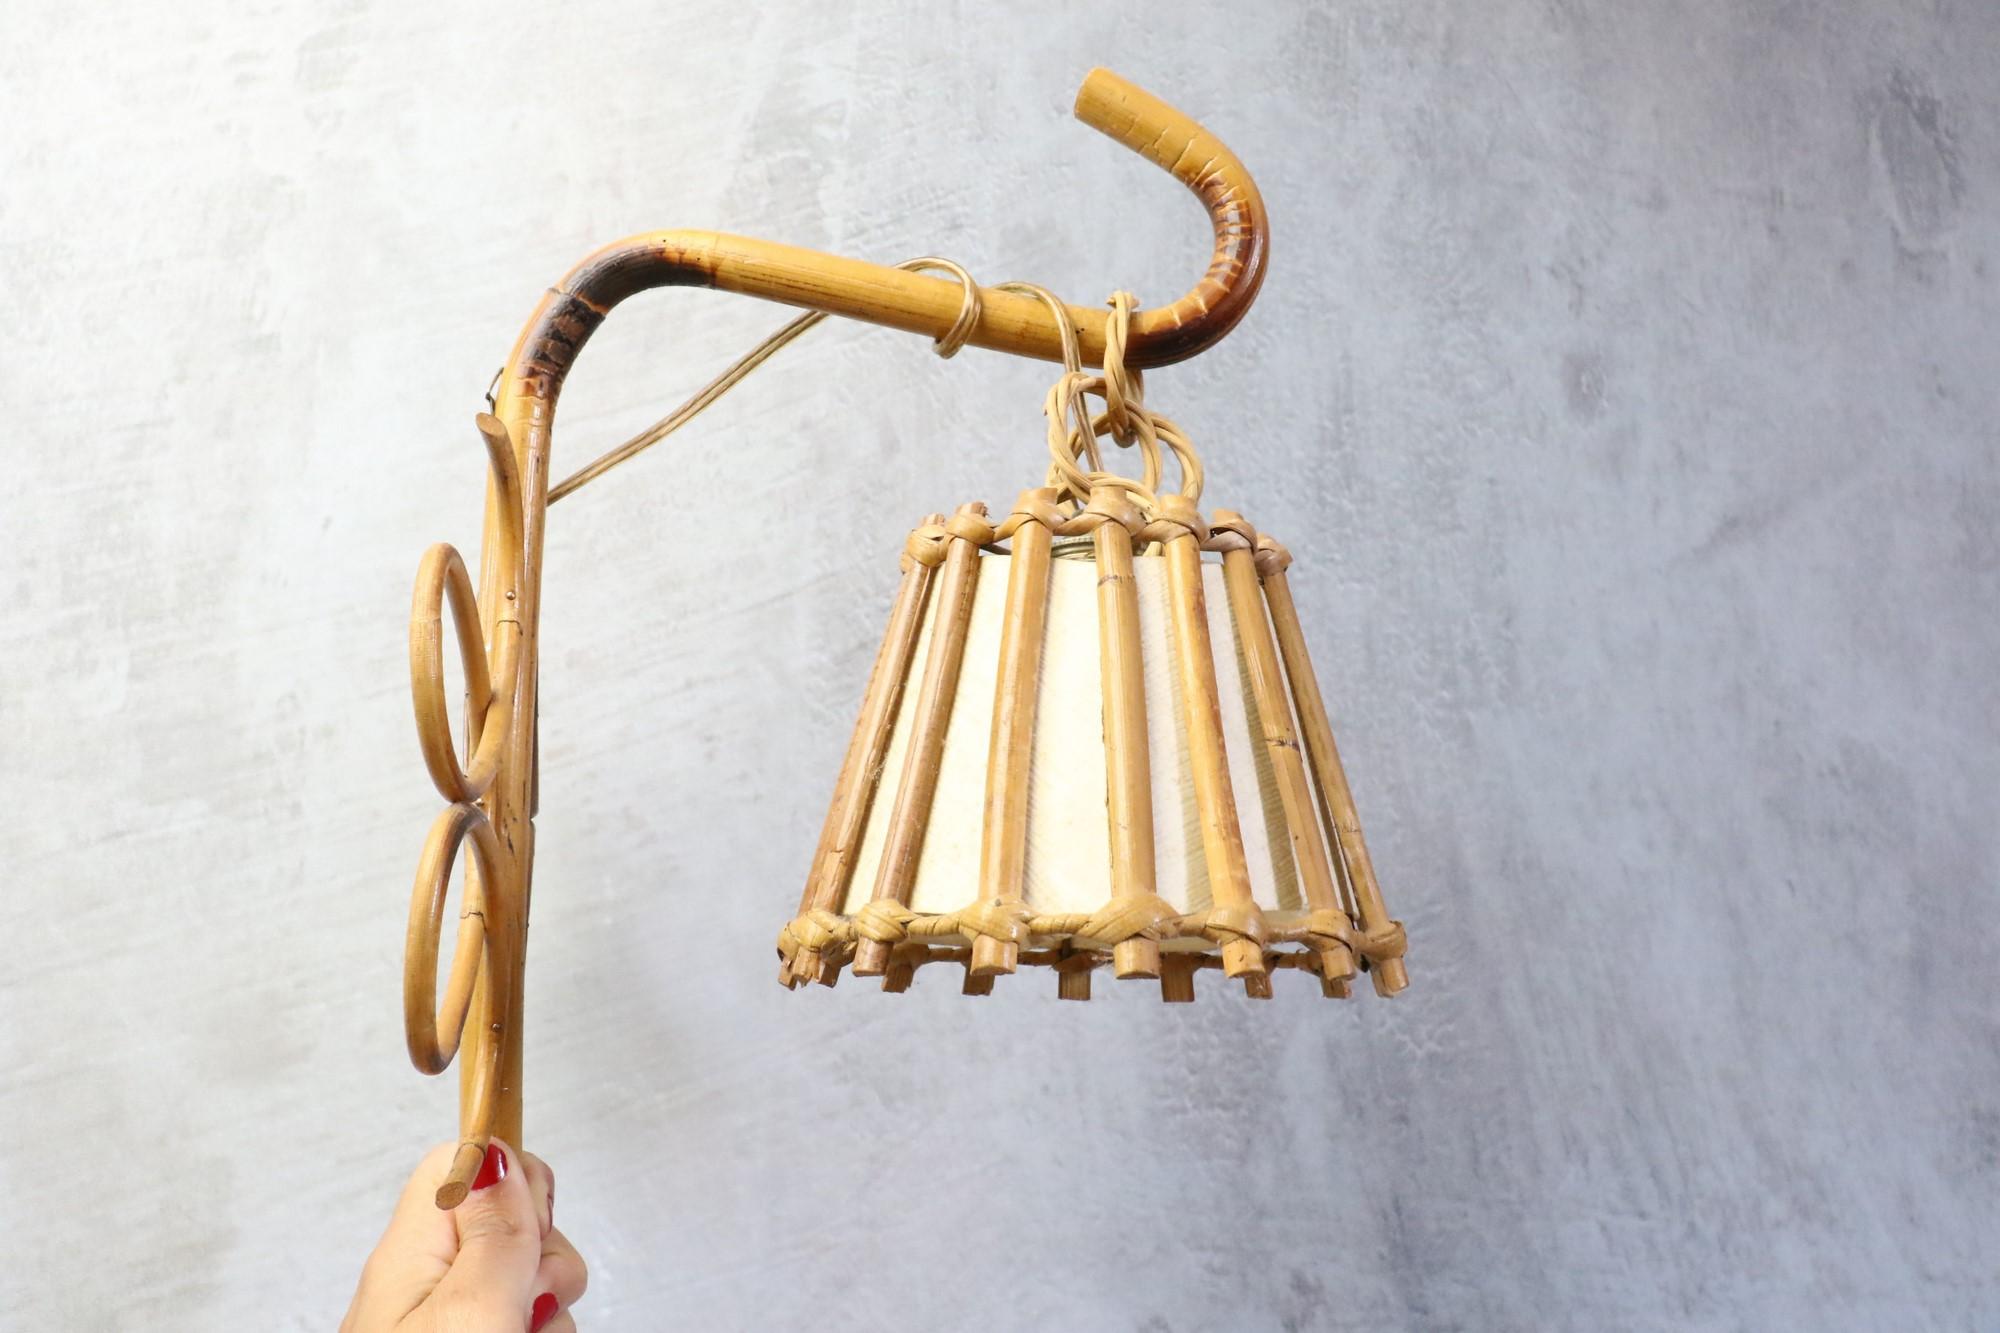 Louis Sognot bamboo and rattan wall lamp Mid-Century Modern 1960, France.

Very nice wall light by the French designer Louis Sognot. It is very well made. The artist has created many models using bamboo and rattan for the structure of his sconces.